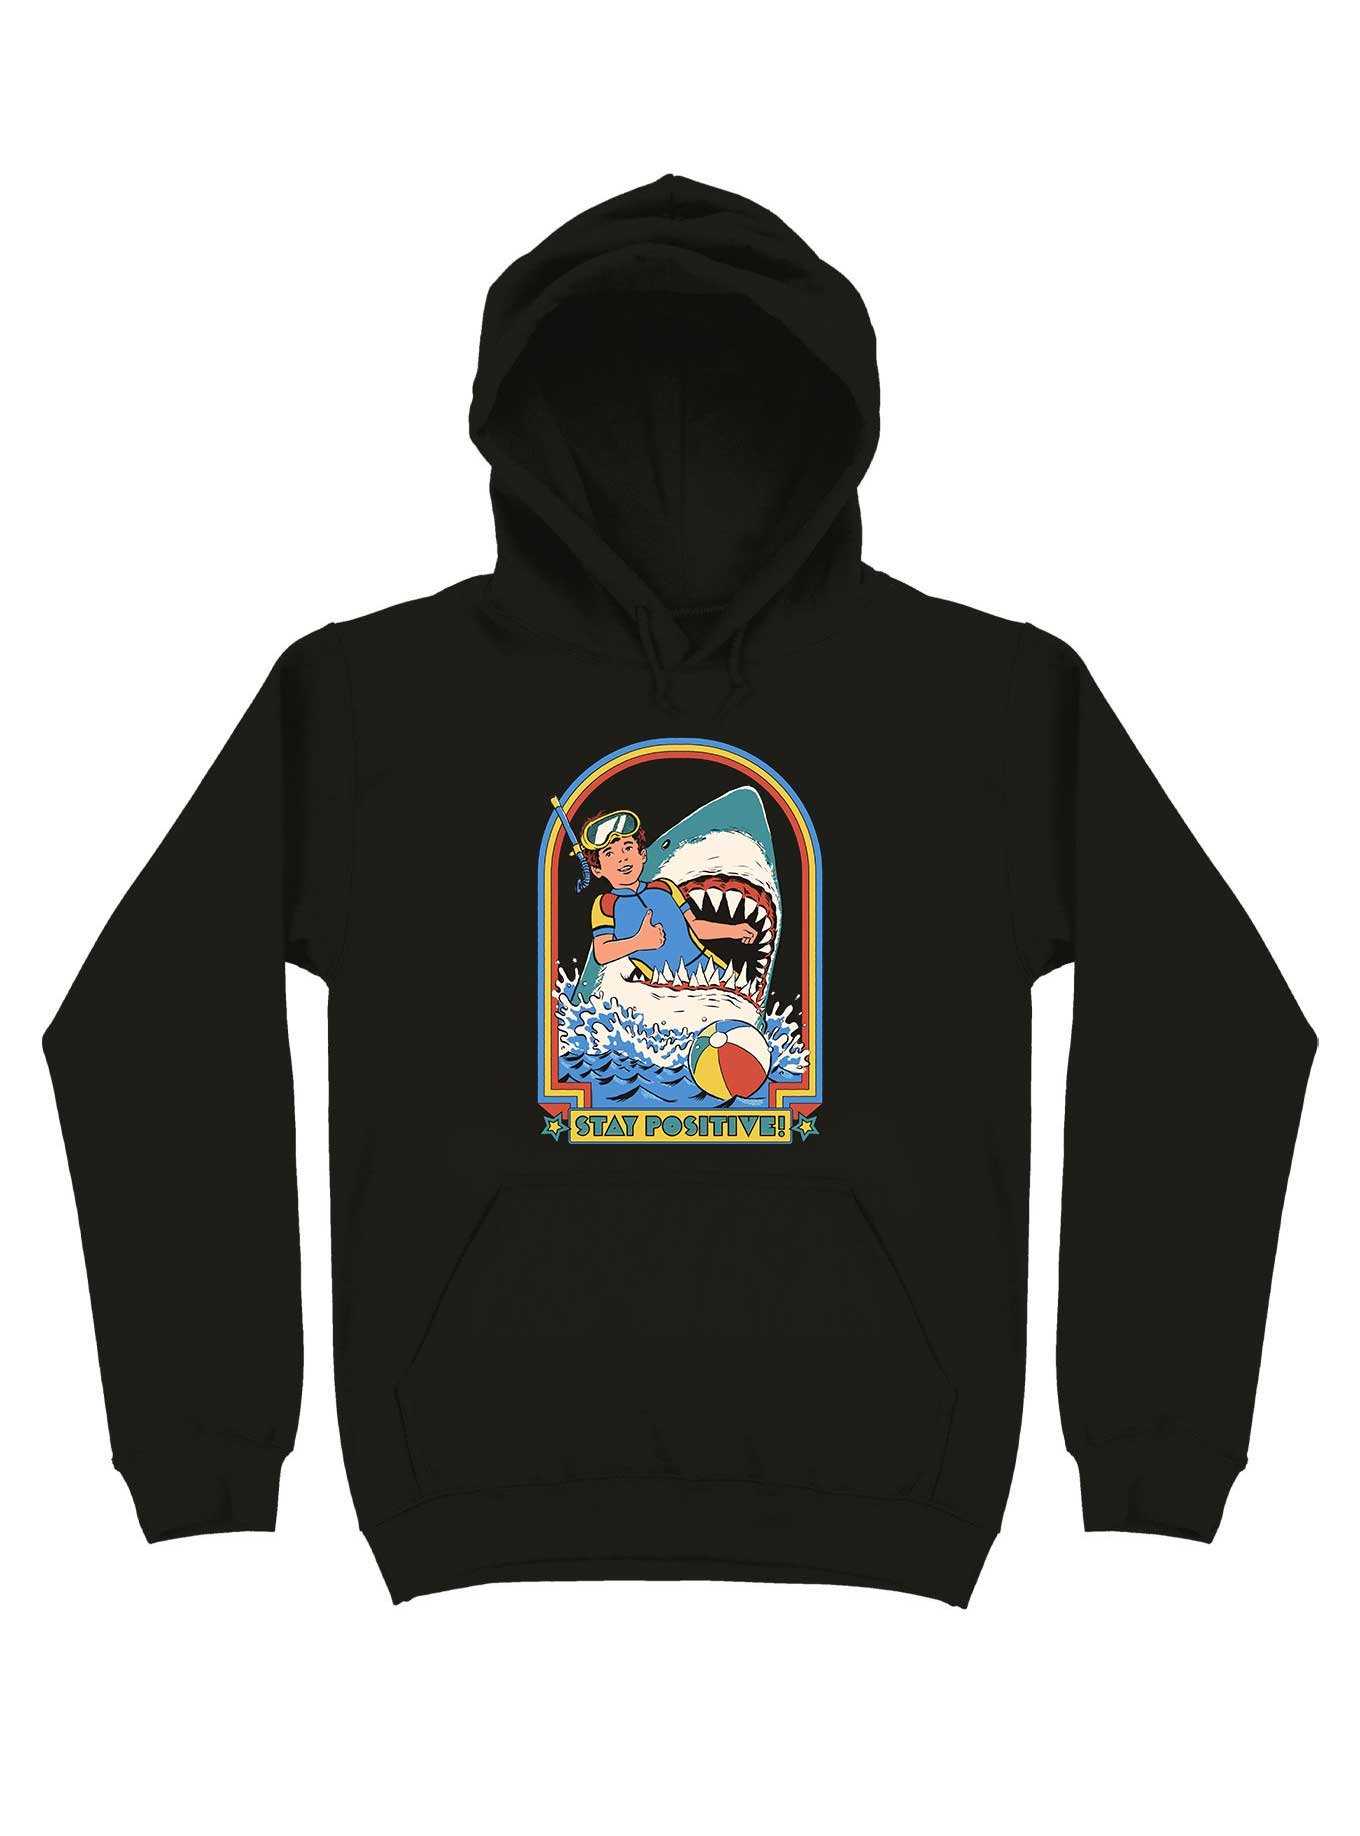 Stay Positive Hoodie By Steven Rhodes, , hi-res